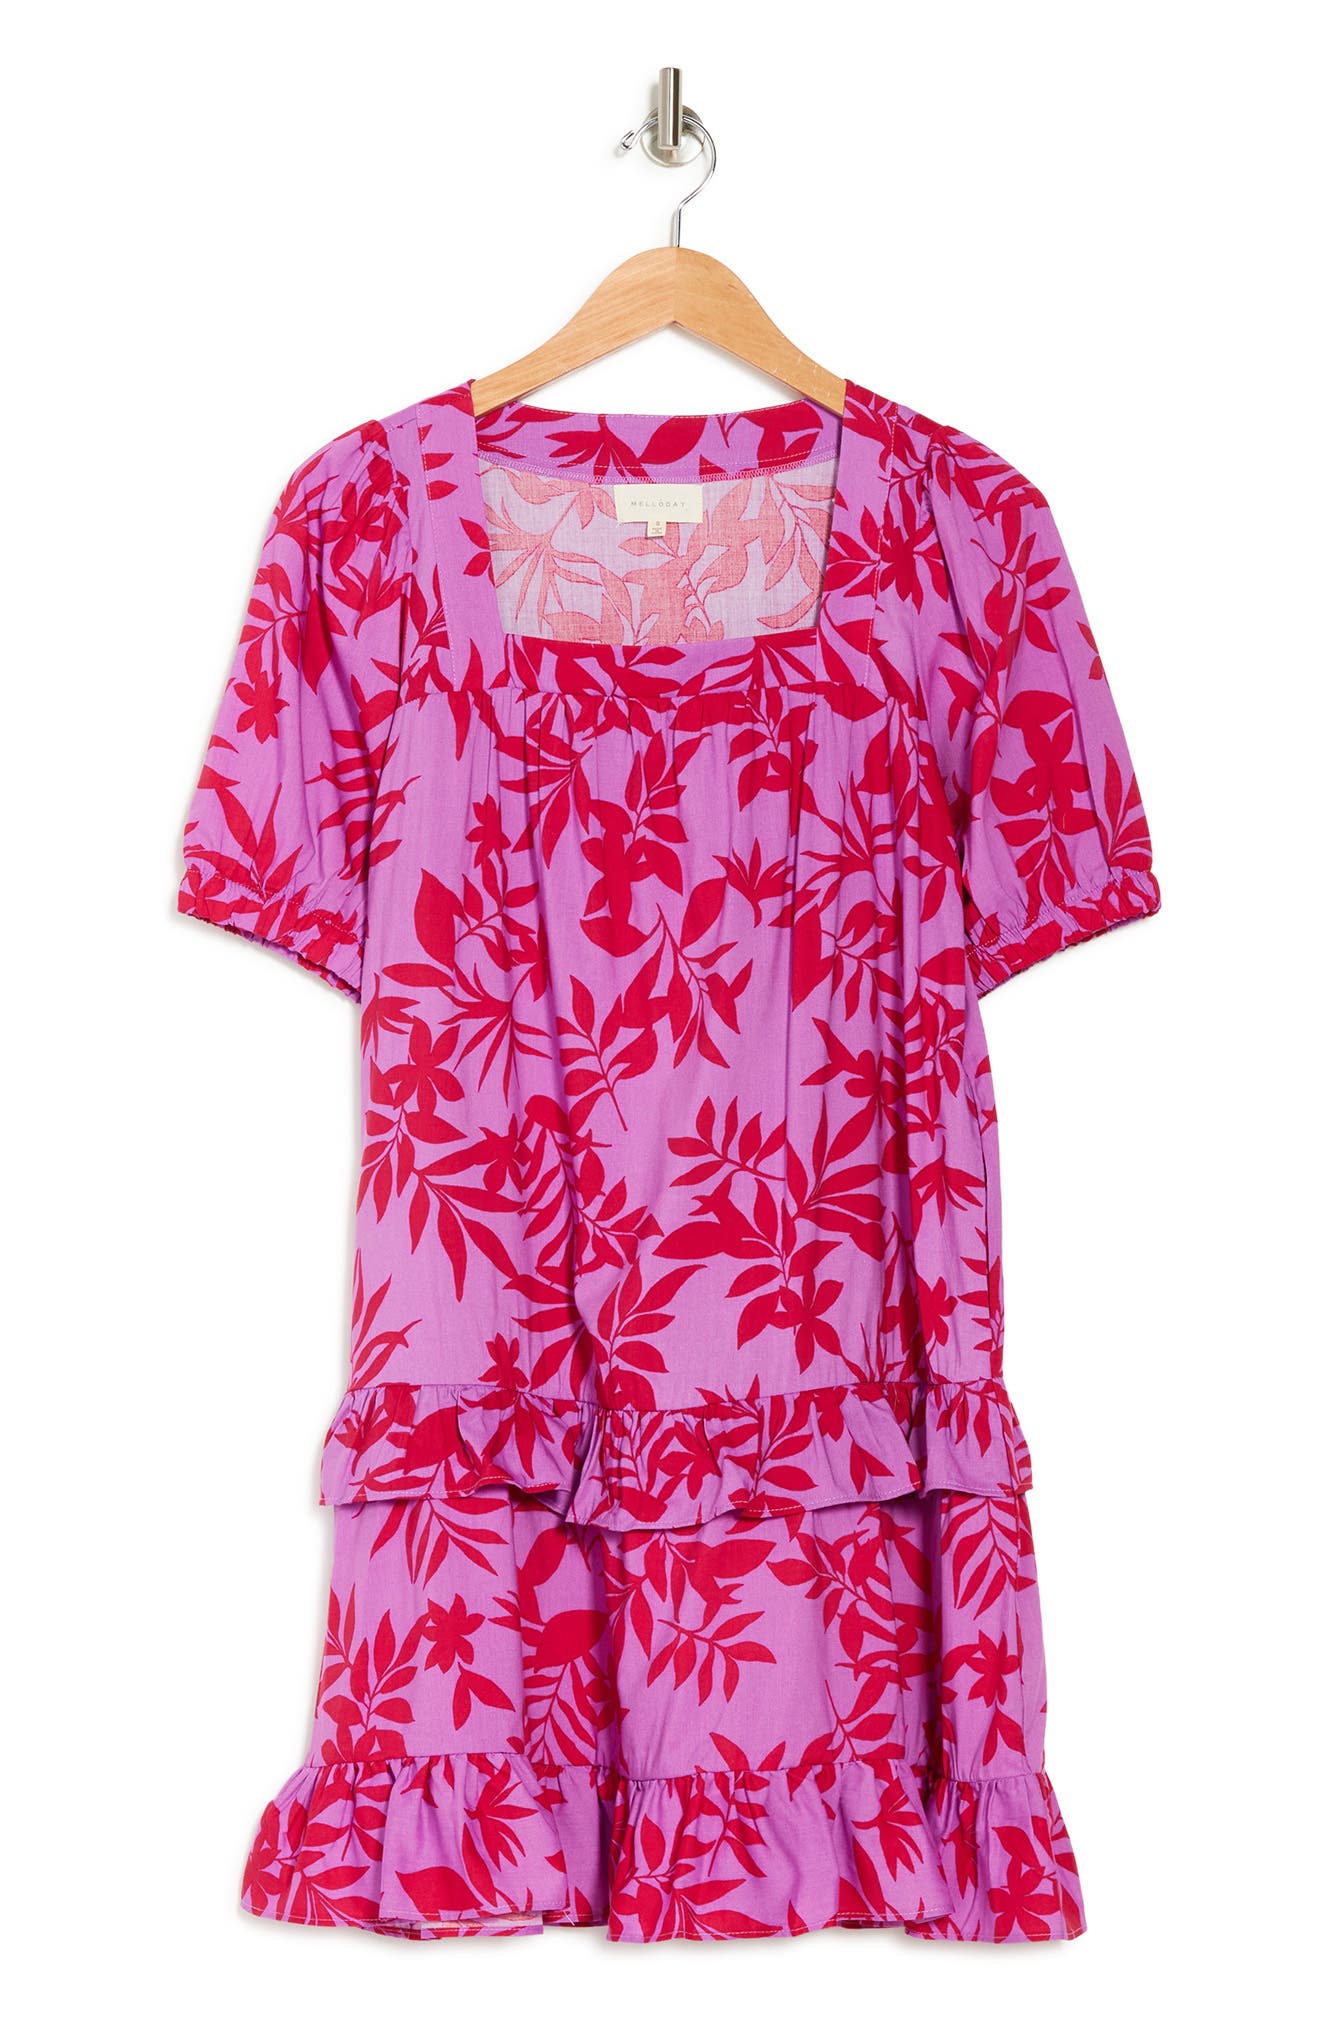 Melloday Floral Short Sleeve Tiered Ruffle Babydoll Shift Dress In Pink/purple Floral